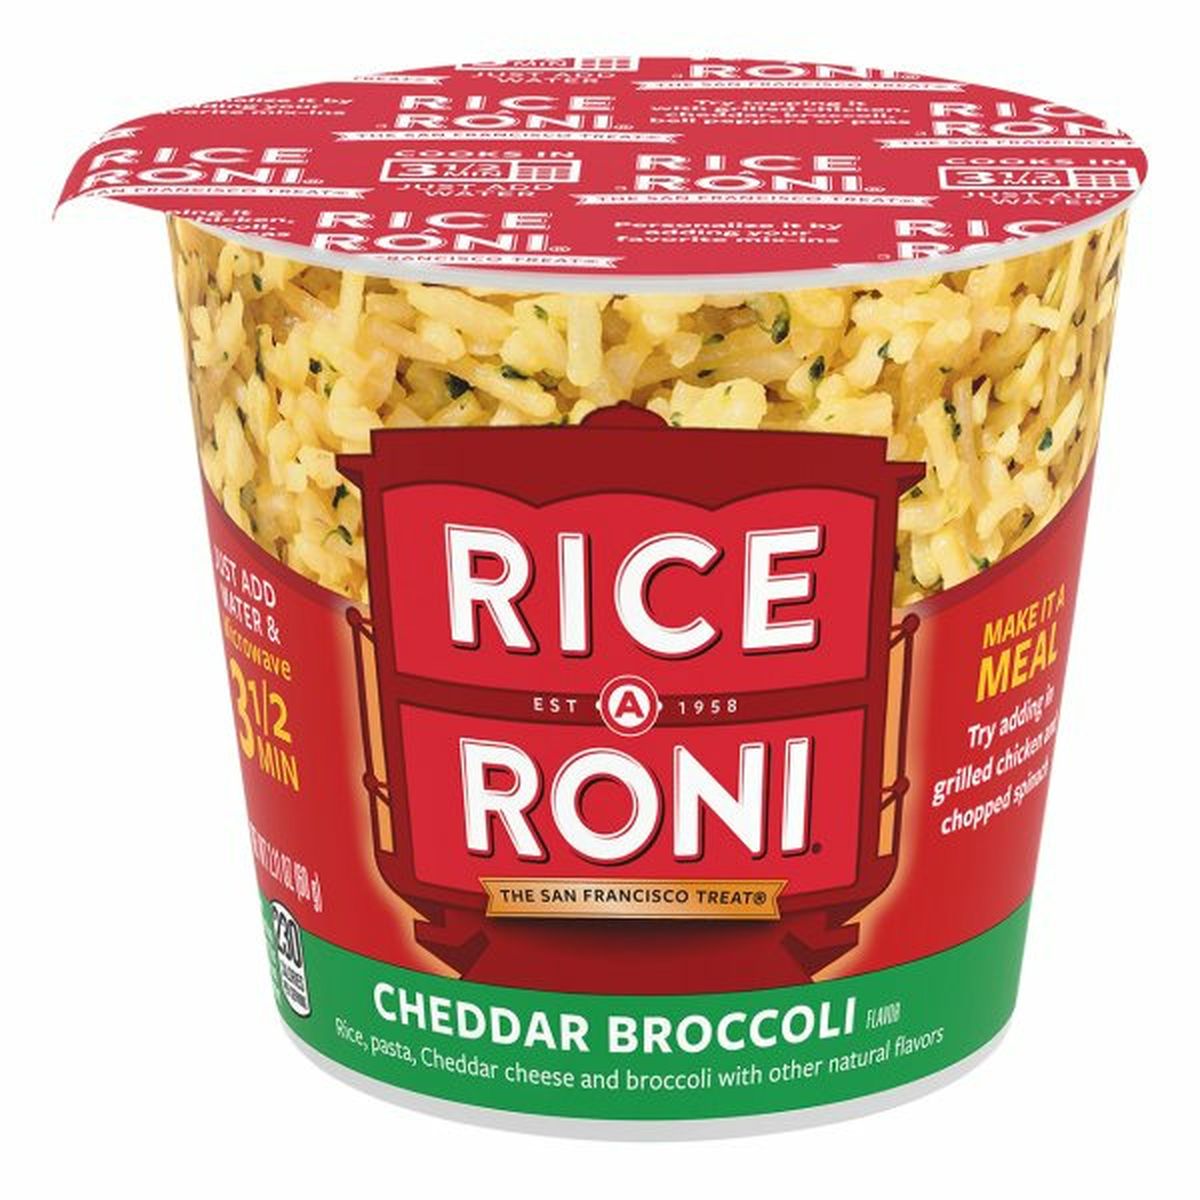 Calories in Rice-a-Roni Rice, Cheddar Broccoli Flavor